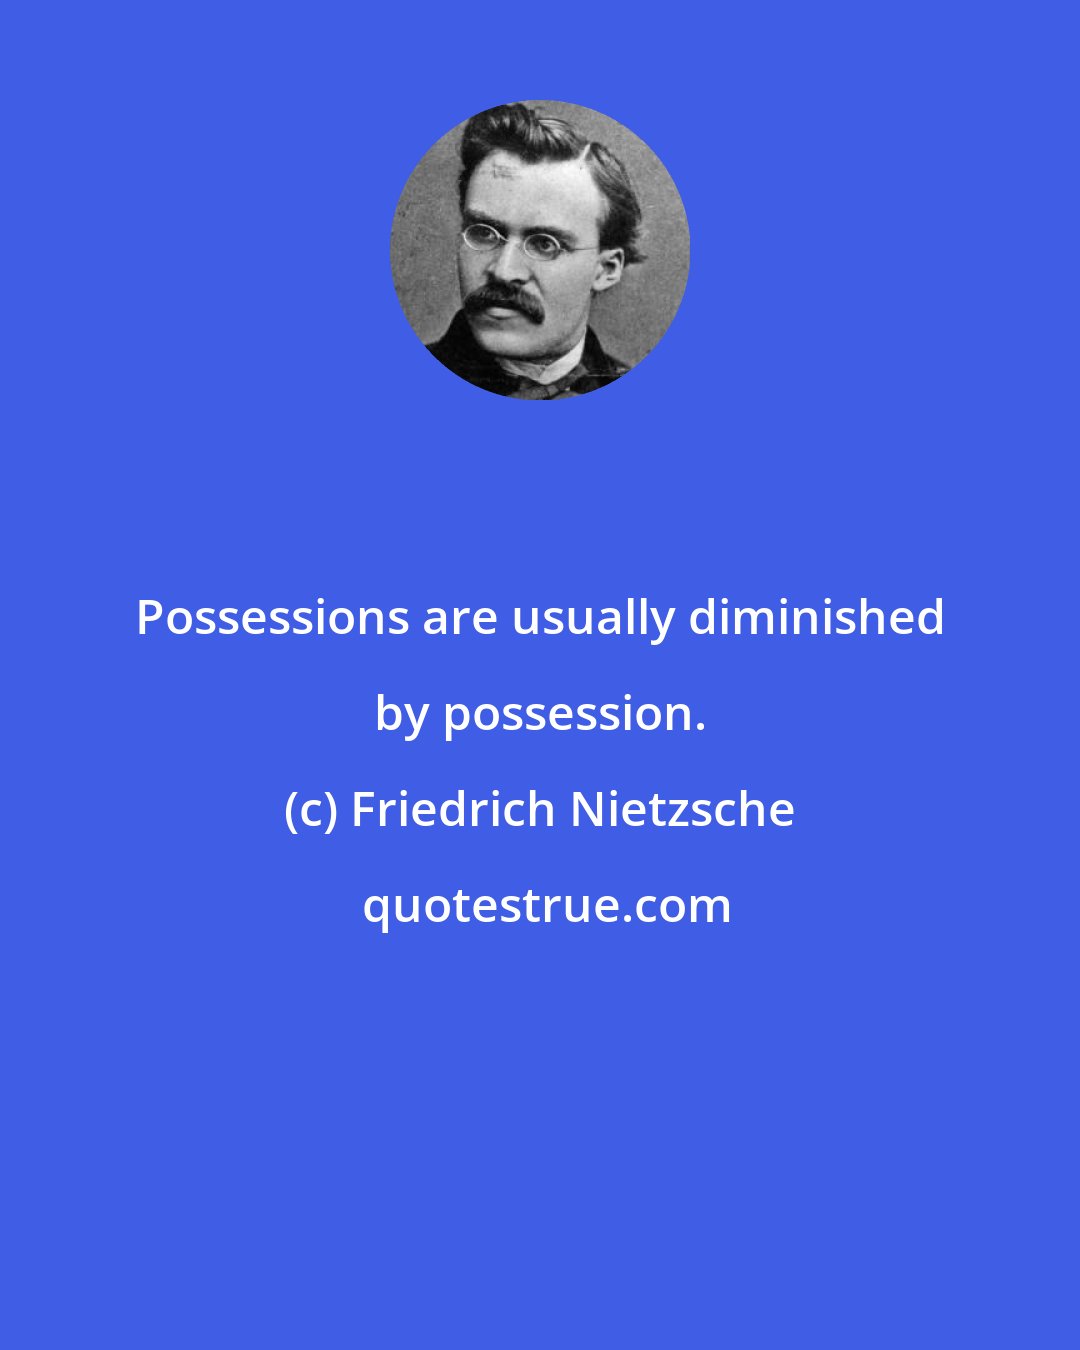 Friedrich Nietzsche: Possessions are usually diminished by possession.